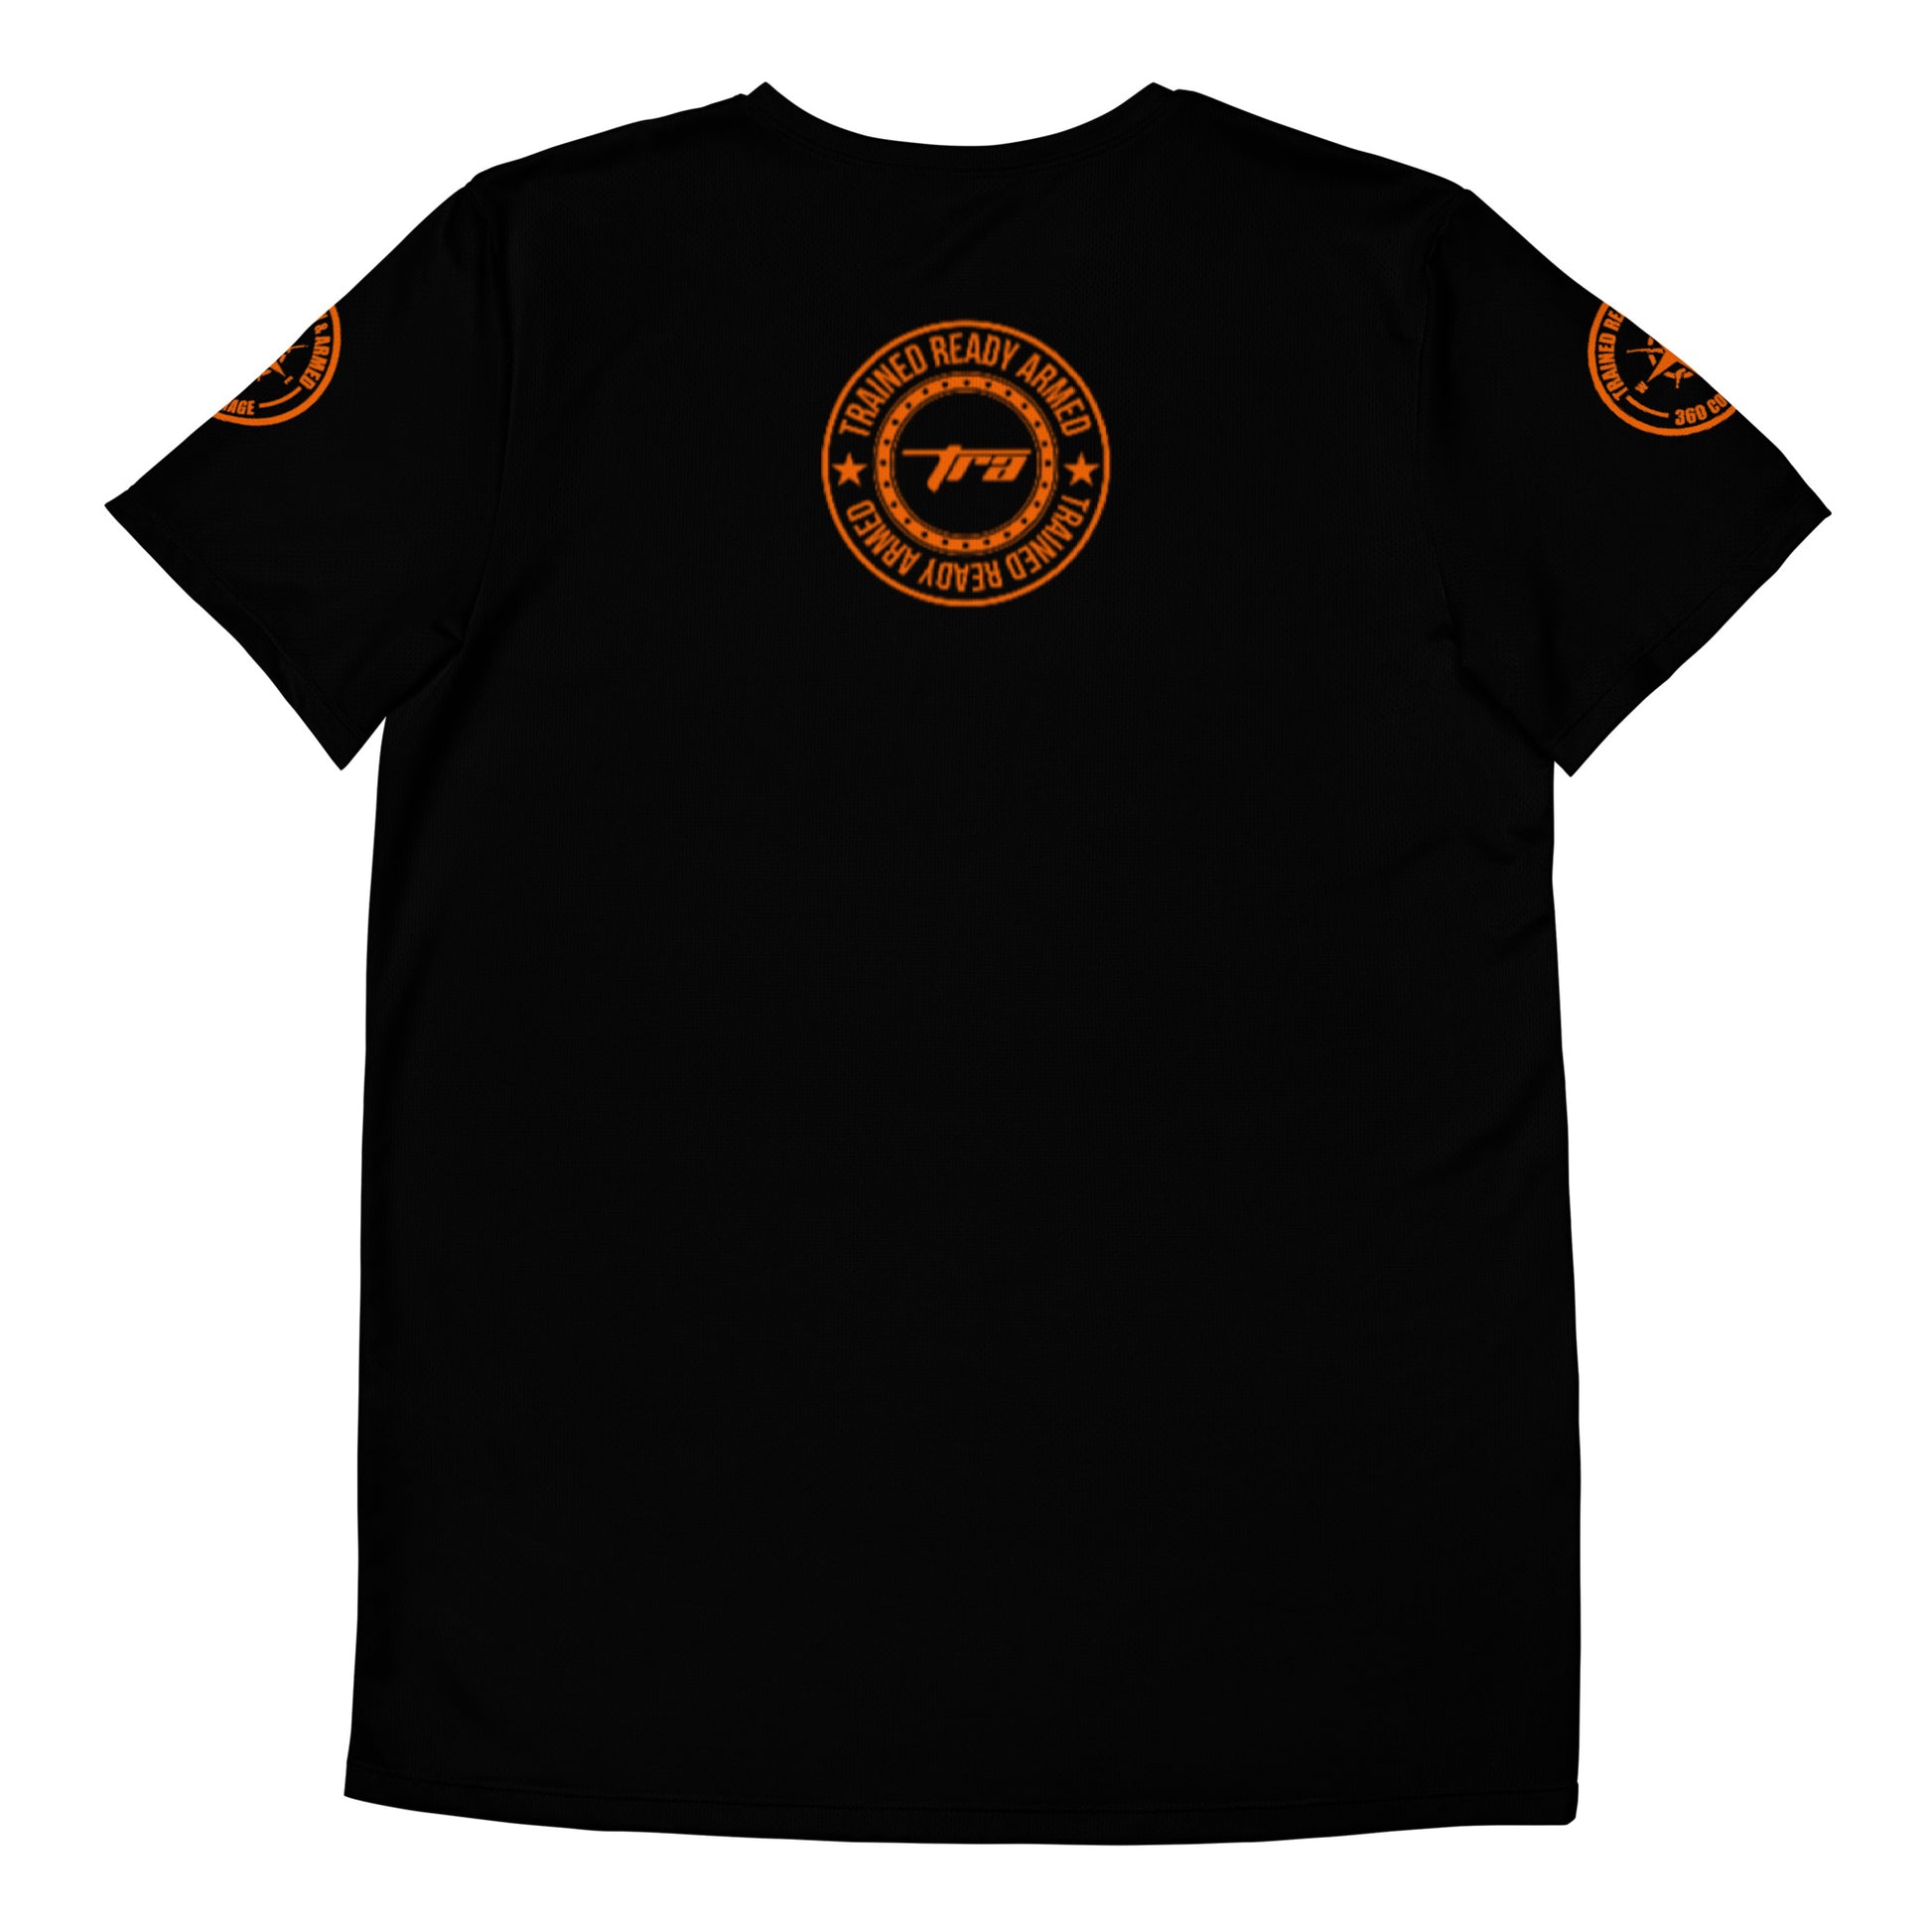 Trained Ready & Armed Sublimination Men's Athletic T-shirt - Trained Ready Armed Apparel